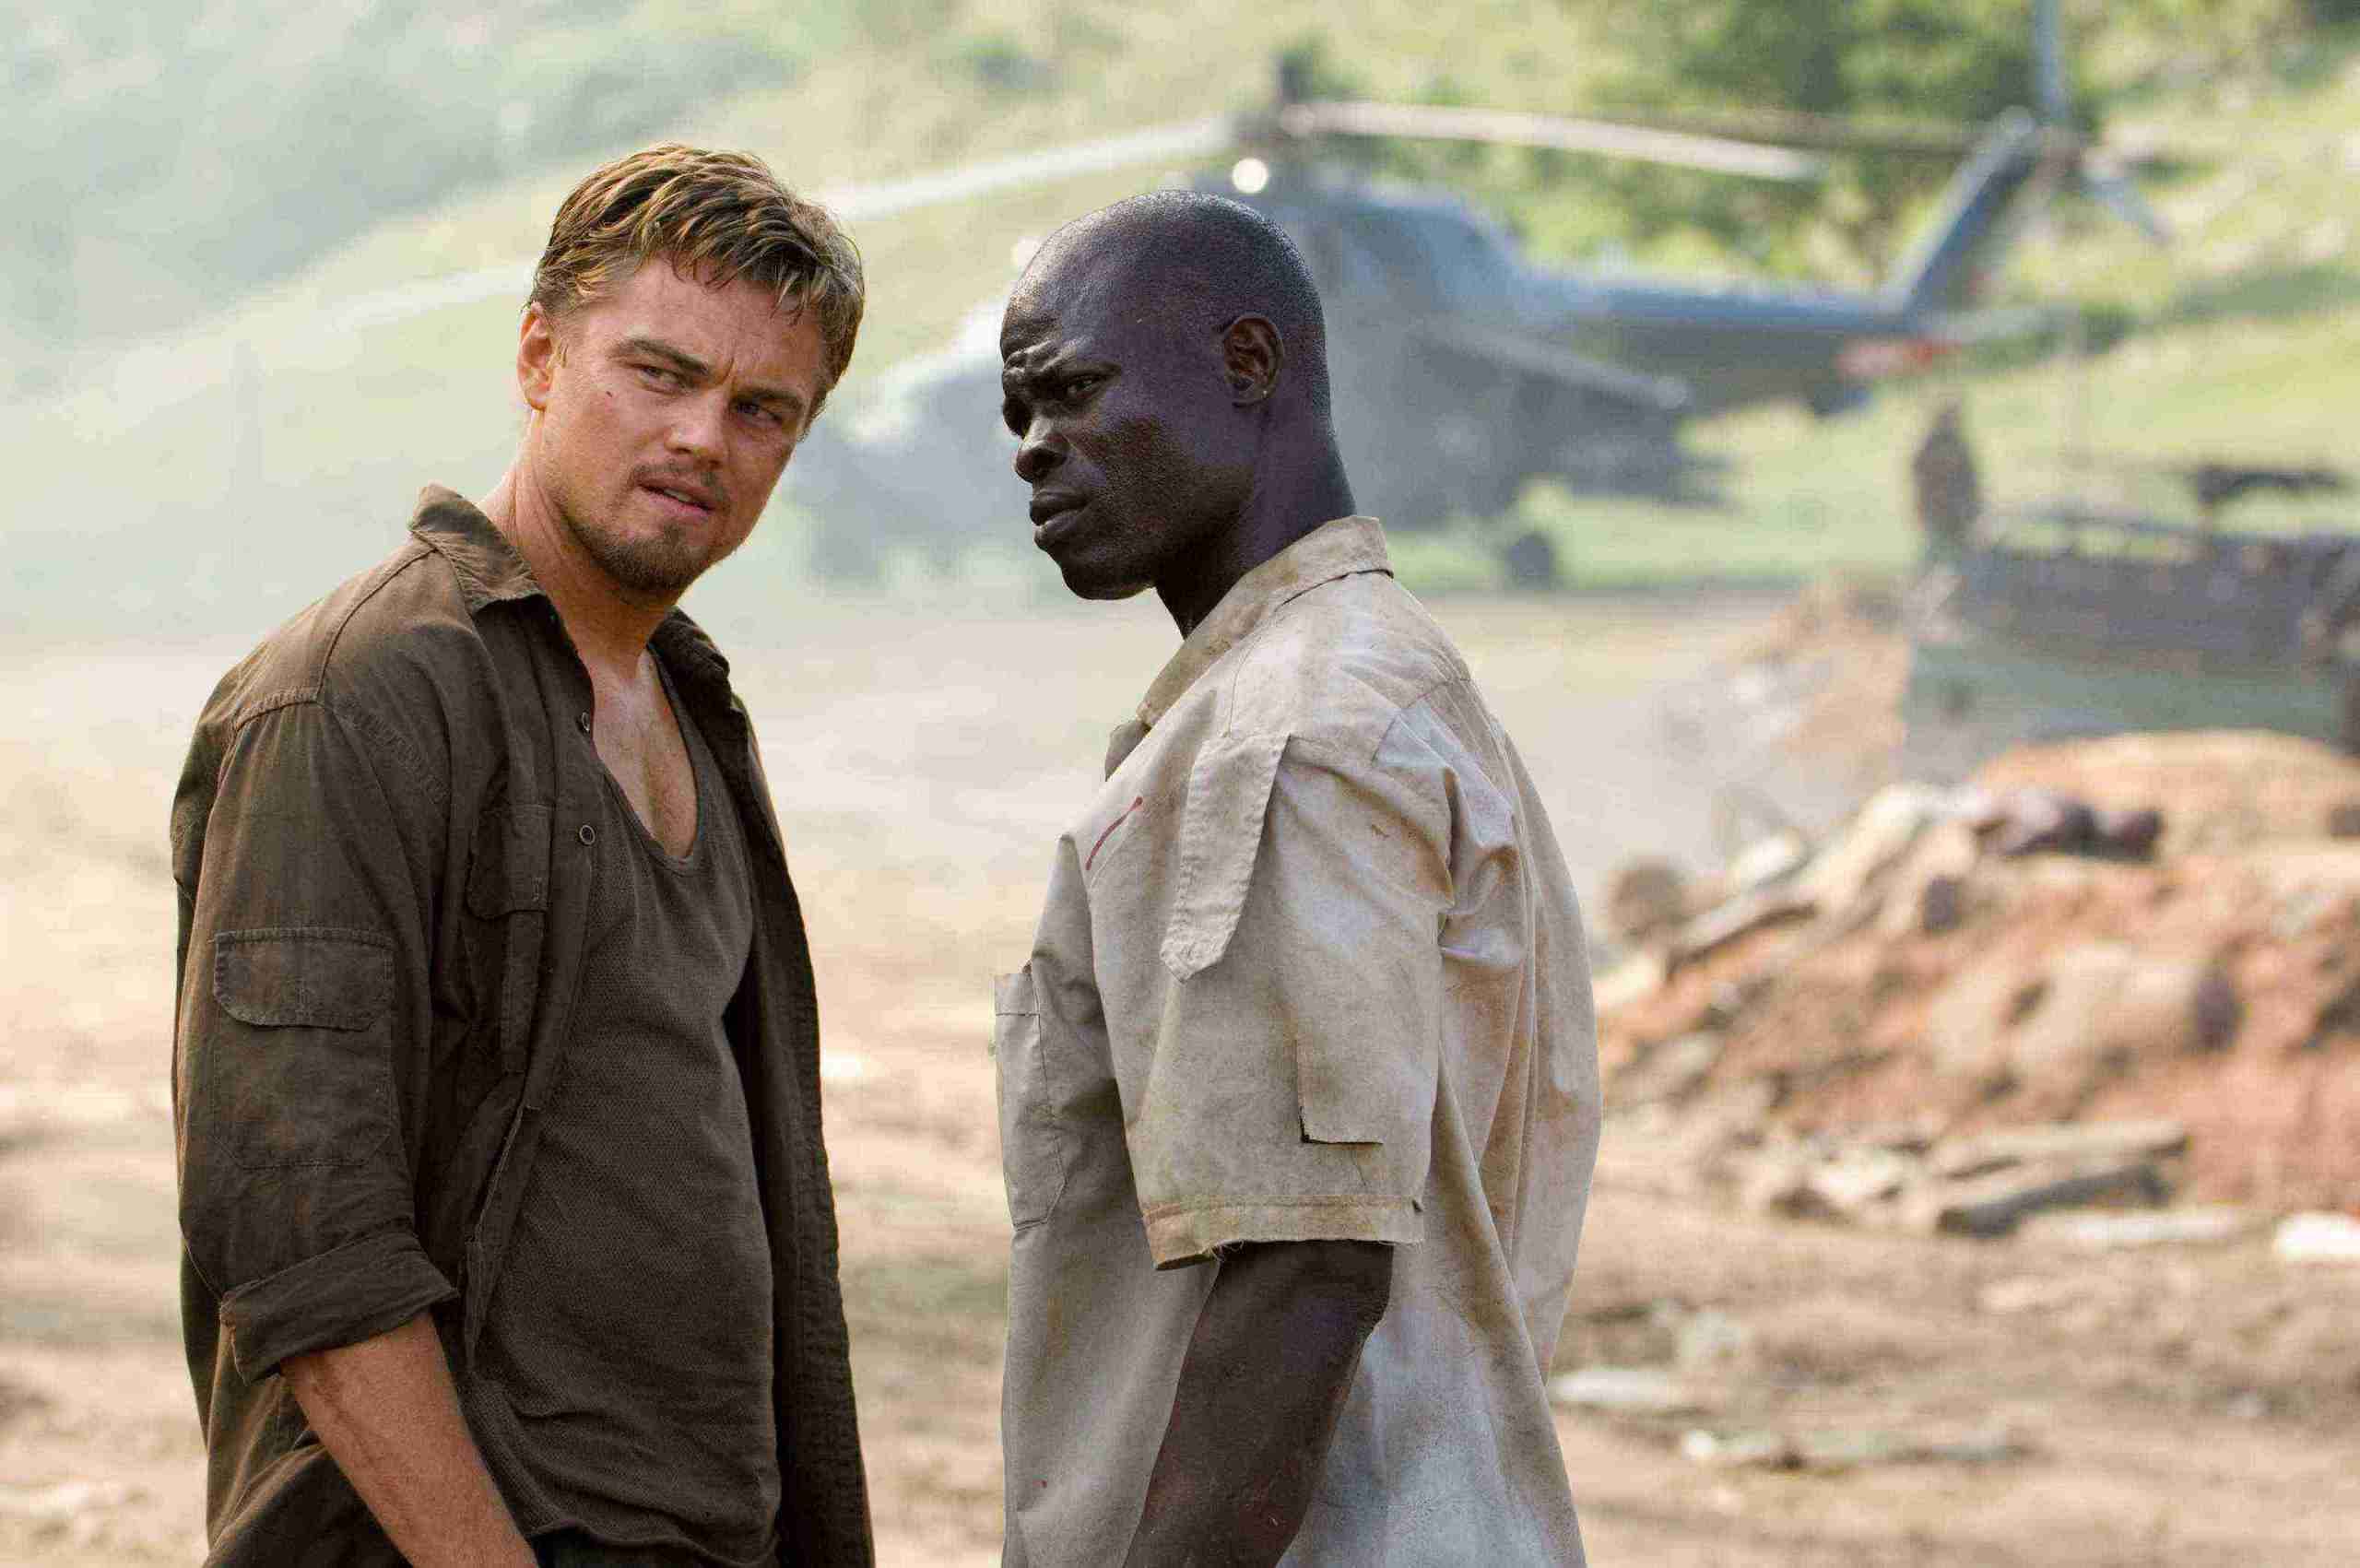 LEONARDO DiCAPRIO stars as Danny Archer and DJIMON HOUNSOU stars as Solomon Vandy in Warner Bros. Pictures' and Virtual Studios' action drama "Blood Diamond," distributed by Warner Bros. Pictures. PHOTOGRAPHS TO BE USED SOLELY FOR ADVERTISING, PROMOTION, PUBLICITY OR REVIEWS OF THIS SPECIFIC MOTION PICTURE AND TO REMAIN THE PROPERTY OF THE STUDIO. NOT FOR SALE OR REDISTRIBUTION.